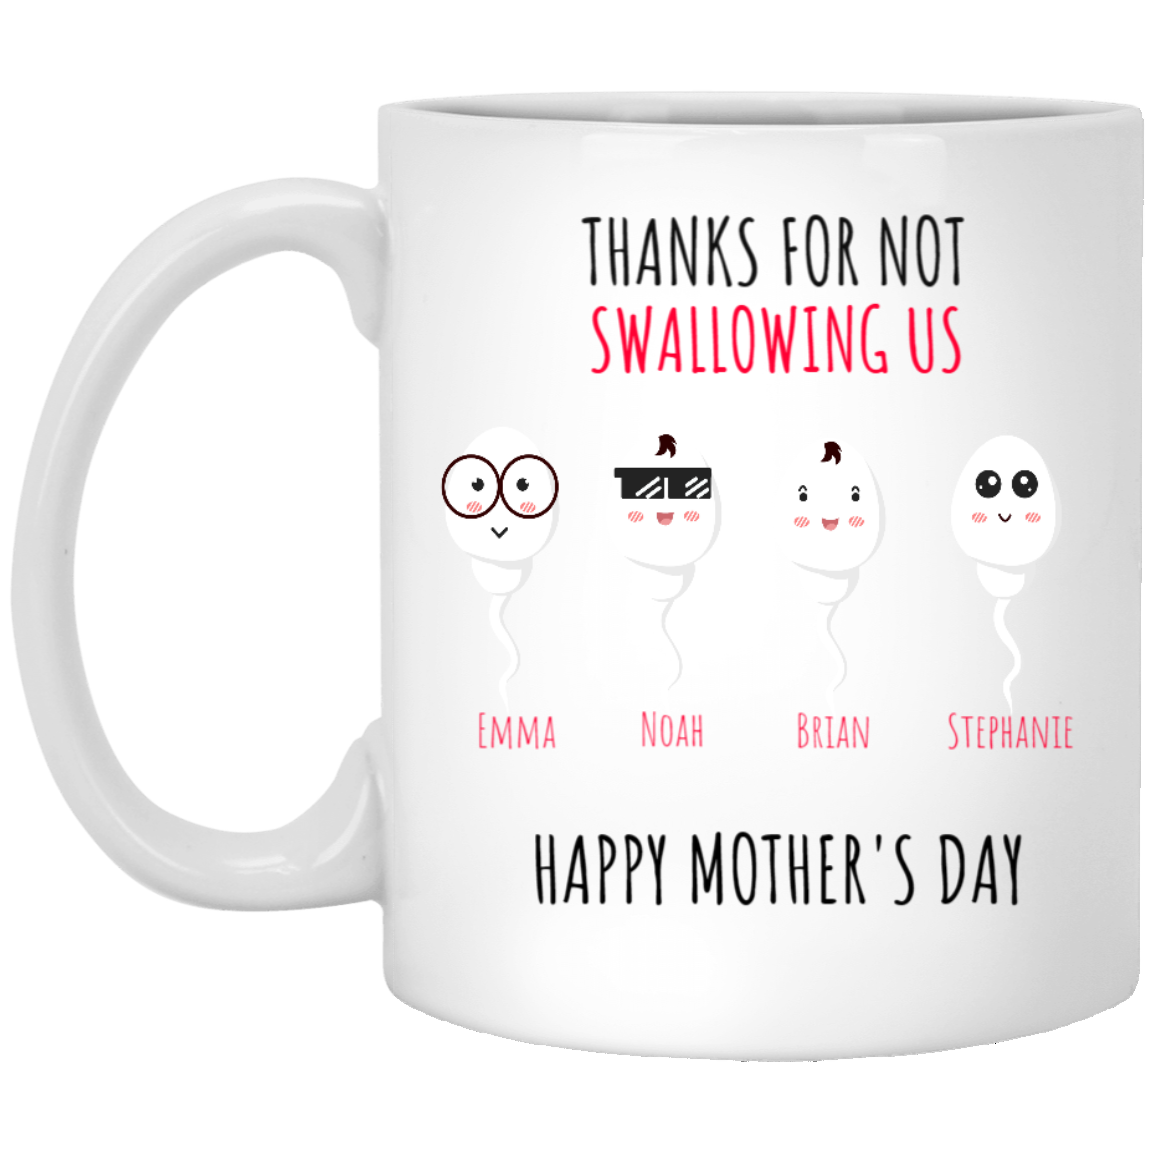 Thanks for not swallowing us 11oz Mug